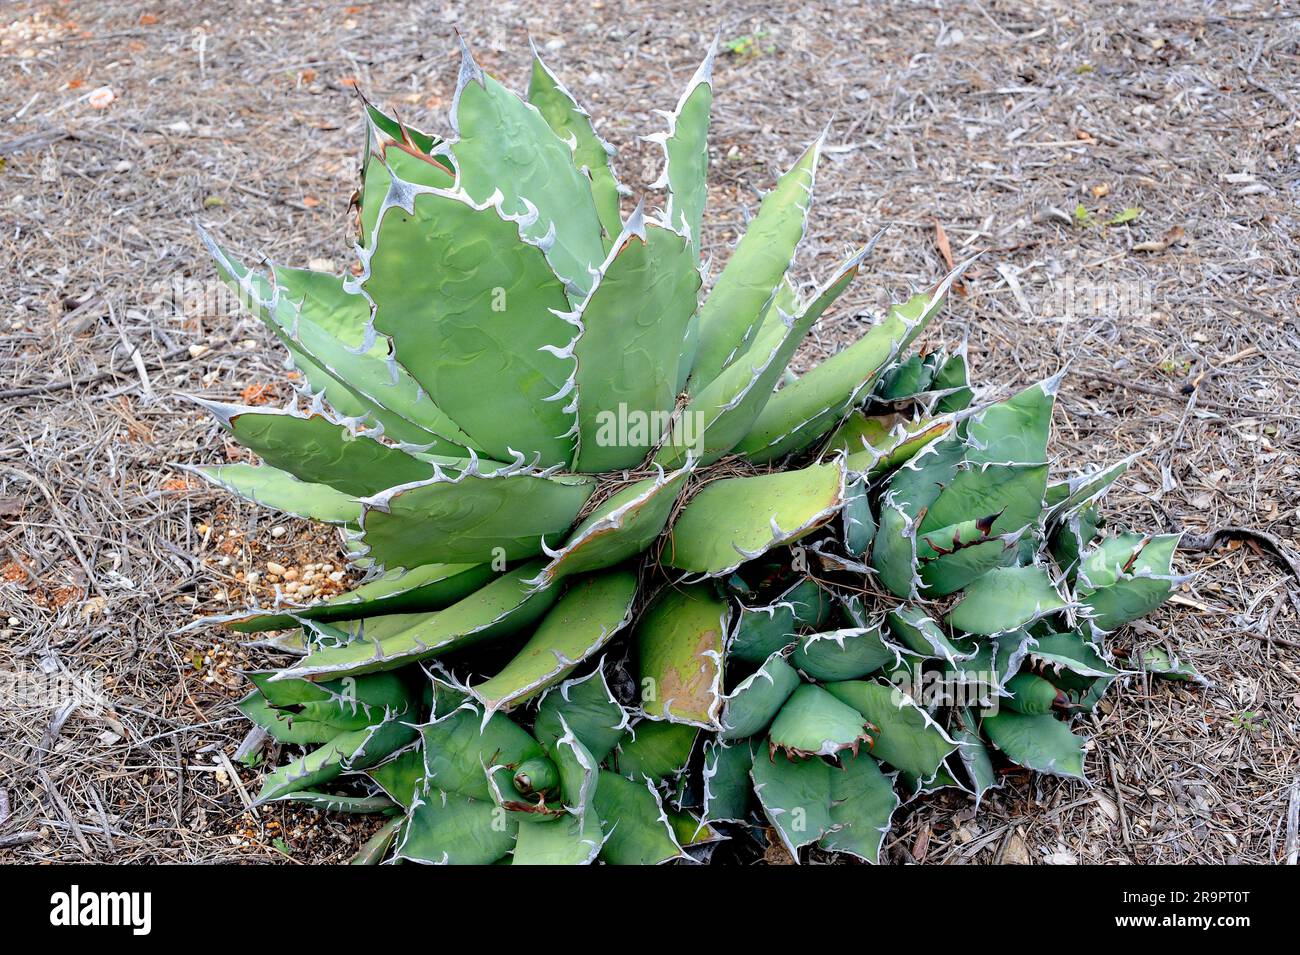 Maguey pulquero (Agave salmiana ferox) is a perennial plant with succulent leaves in rosette. In Mexico is used for obtaining pulque and mezcal. Angio Stock Photo